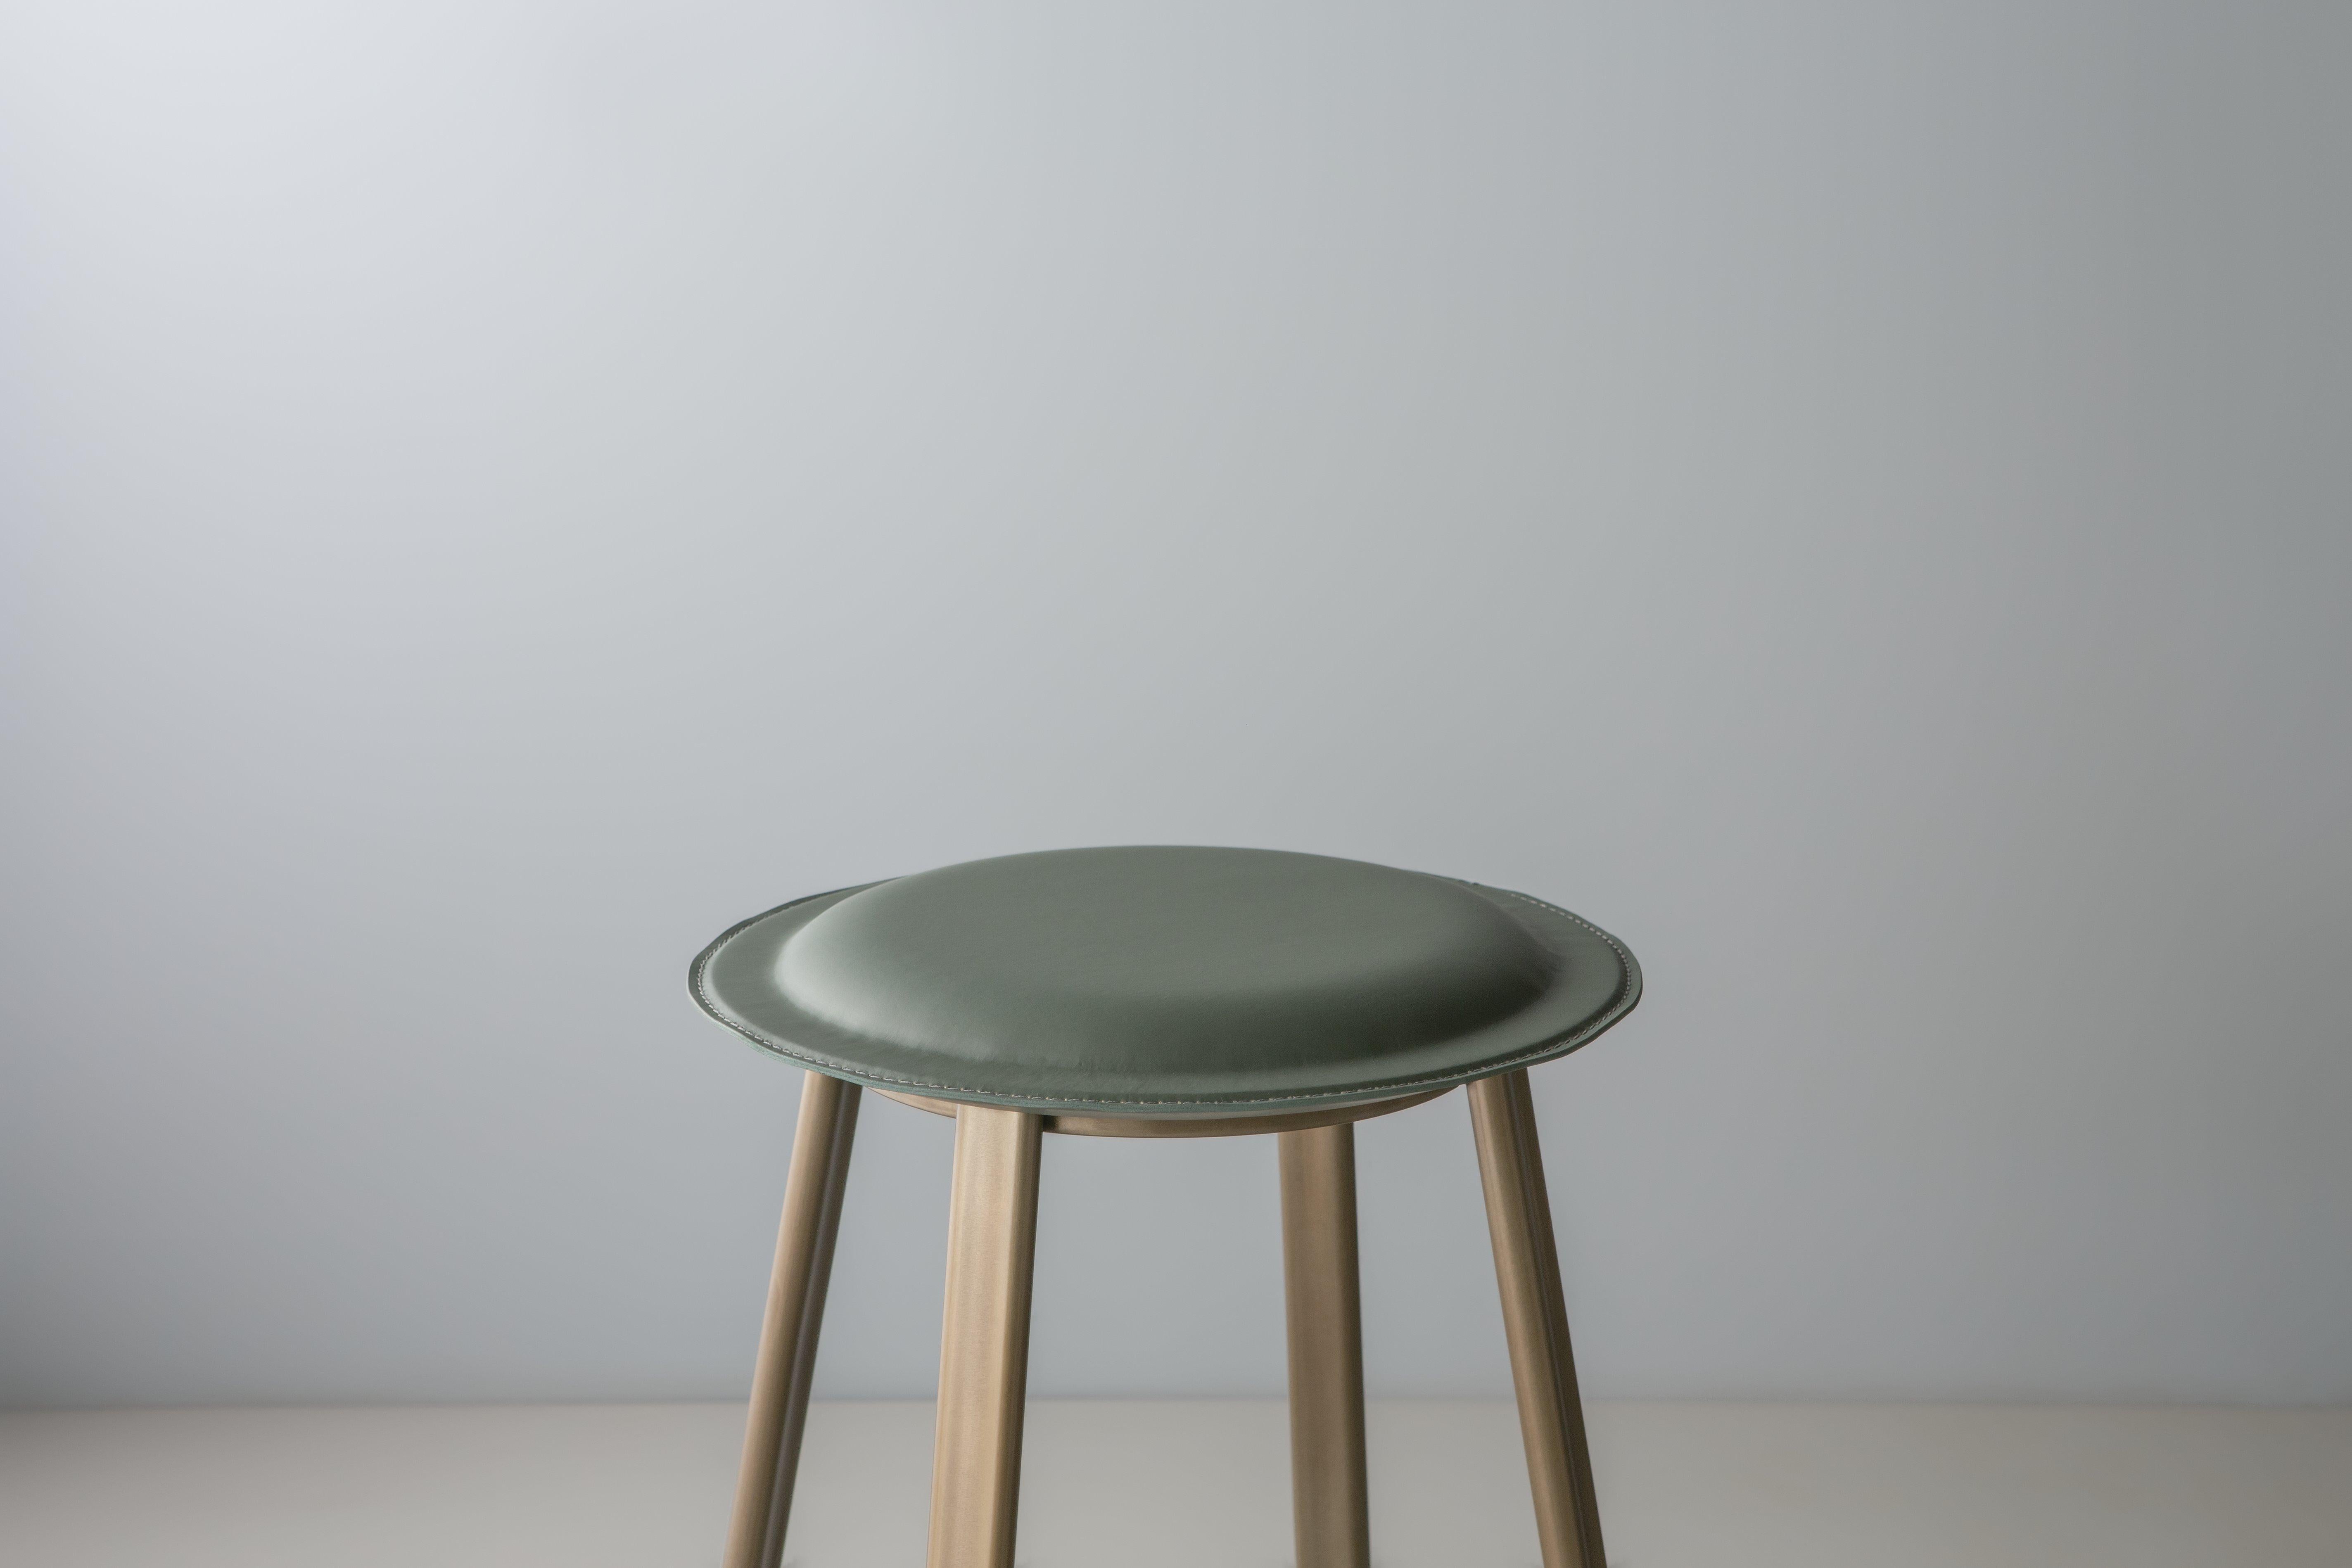 High Rodes Bar Stool by Doimo Brasil
Dimensions: W 43 x D 43 x H 76 cm 
Materials: Aged steel, Aged/crocco leather.

Also available in W 43 x D 43 x H 60 cm, Seat Height: 60 cm. 

With the intention of providing good taste and personality, Doimo